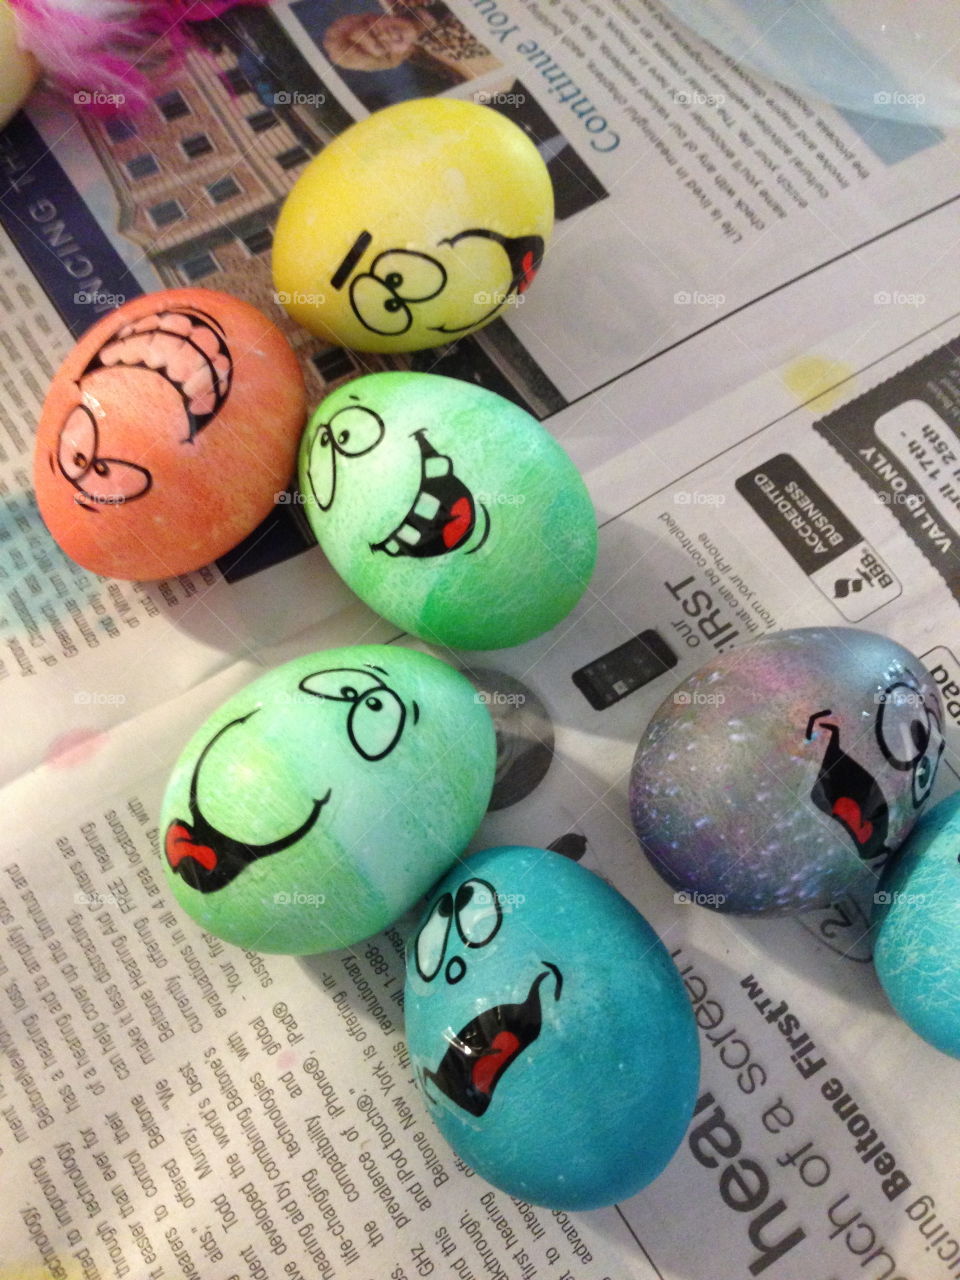 Homemade dyed Easter eggs with silly faces drying on a newspaper.  